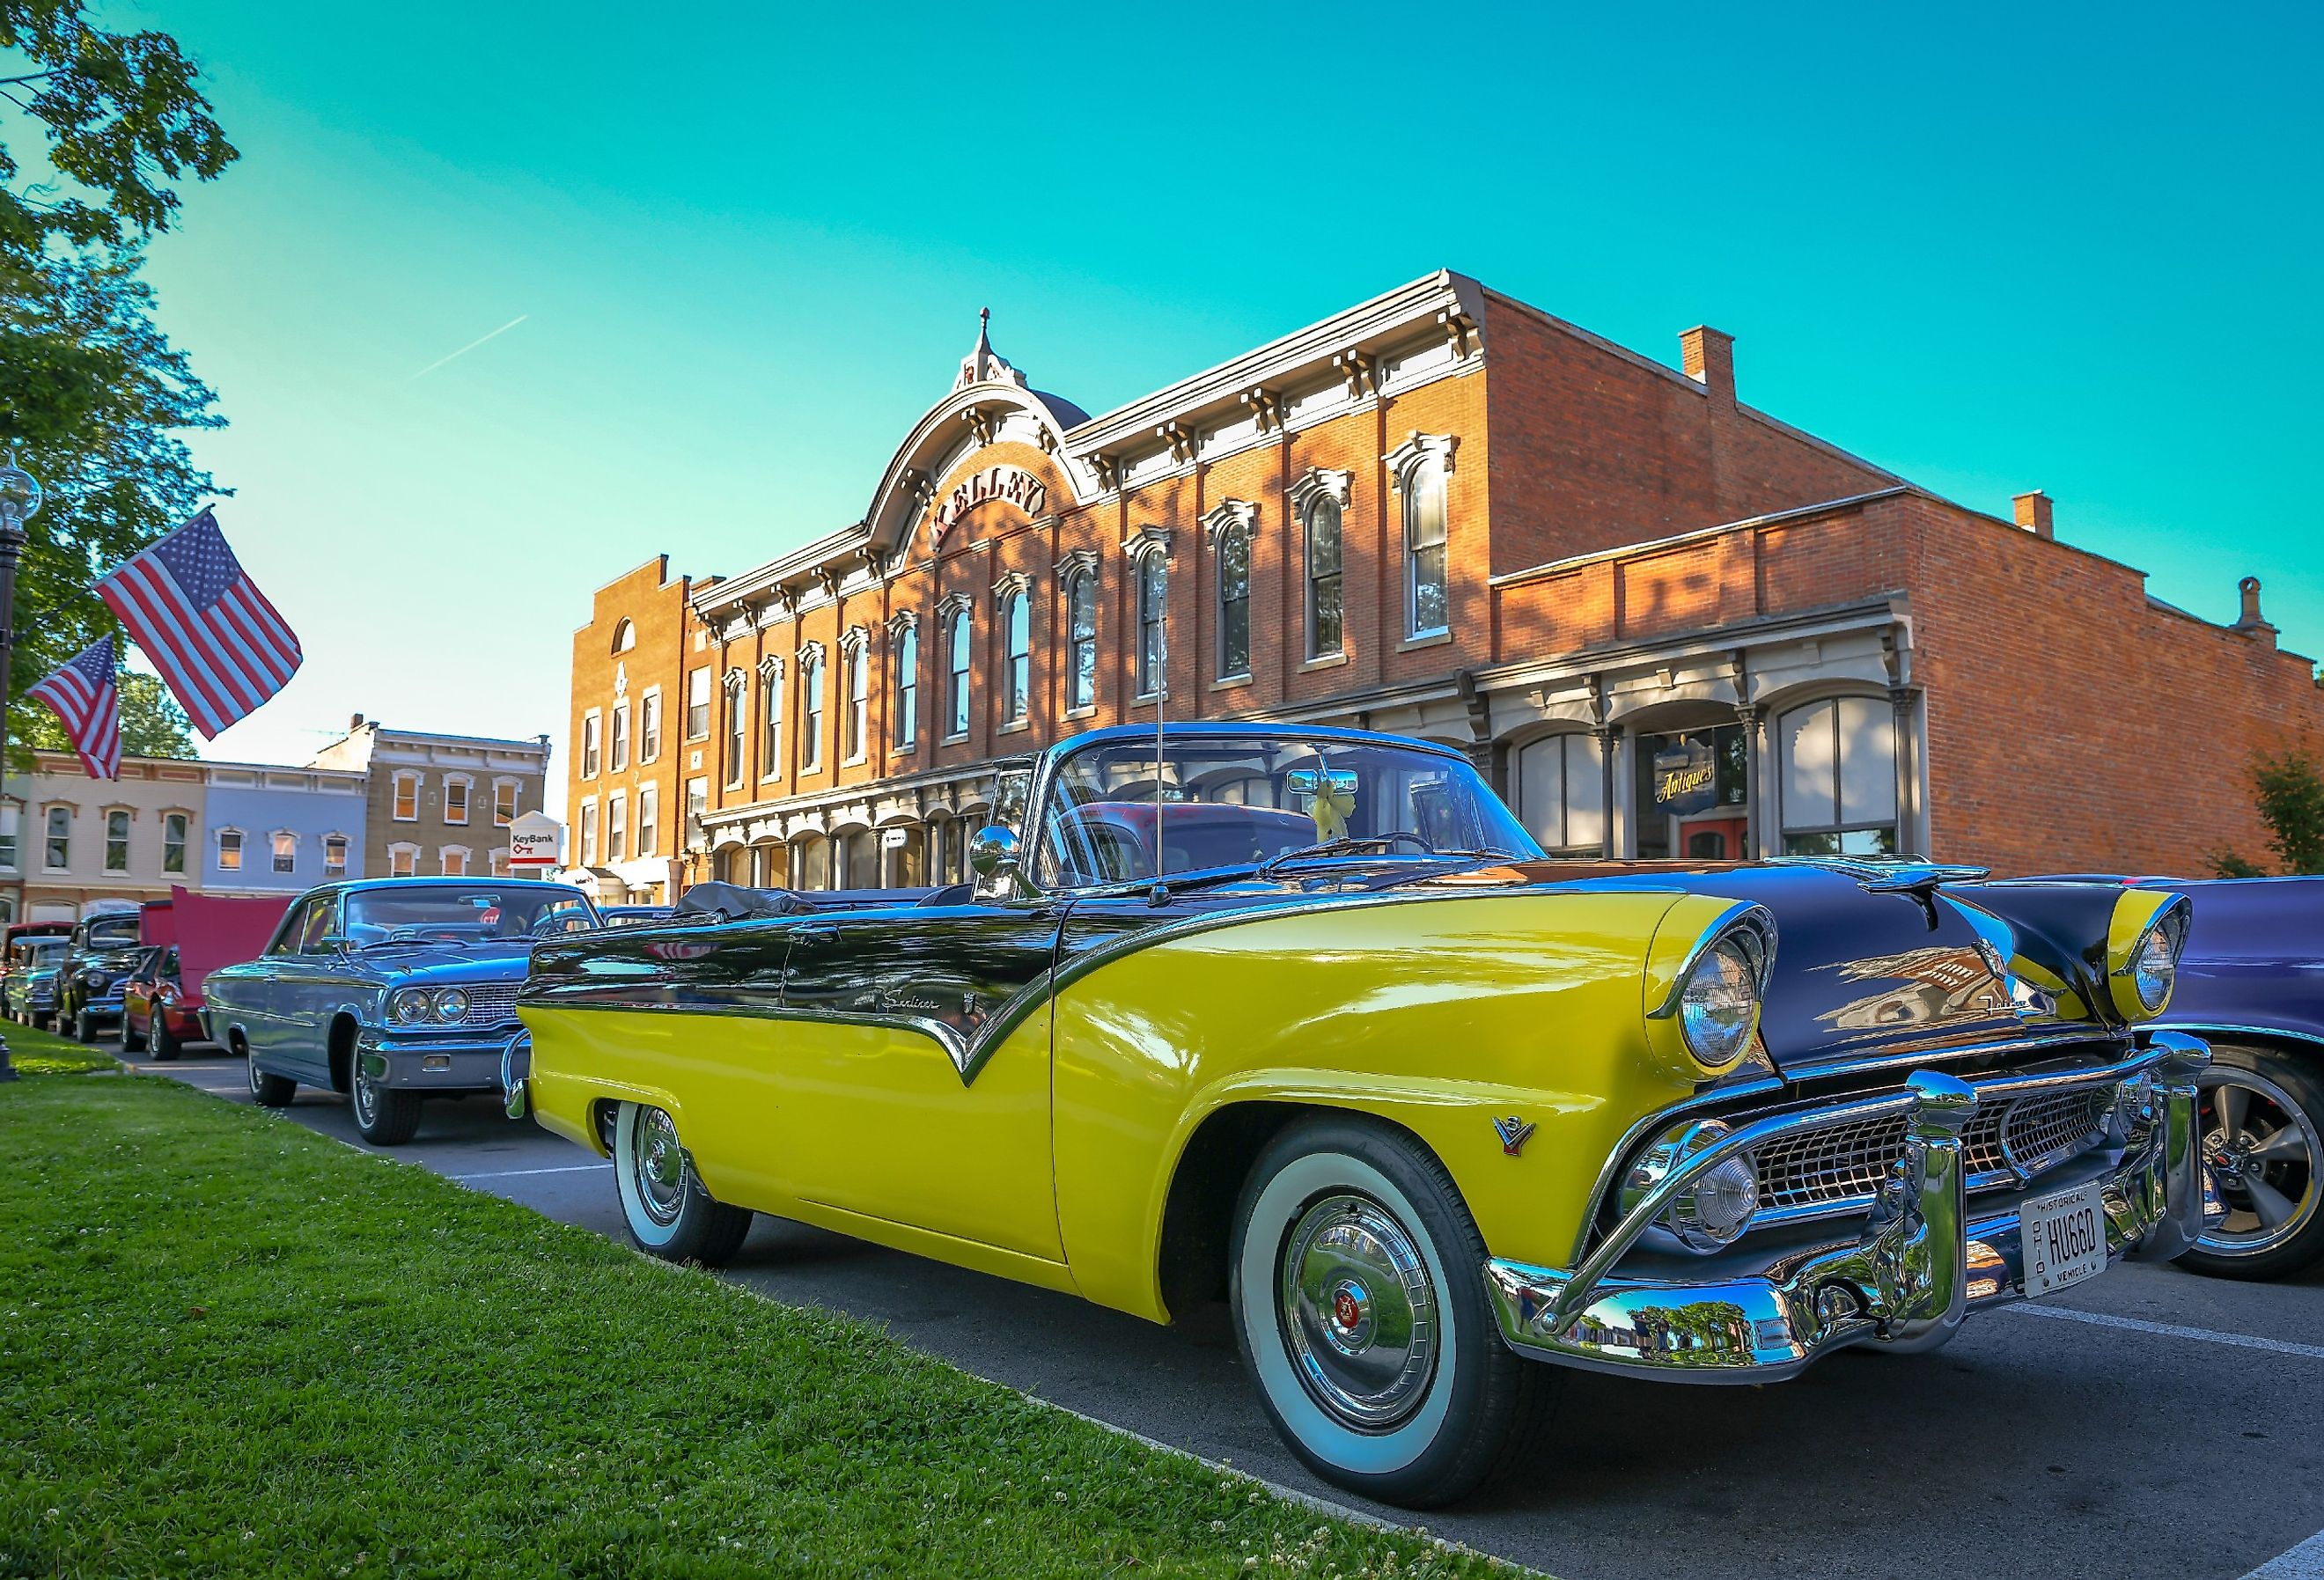 Classic Cars meet on the town square for cruisers night in Milan, Ohio. Image credit Keith J Finks via Shutterstock